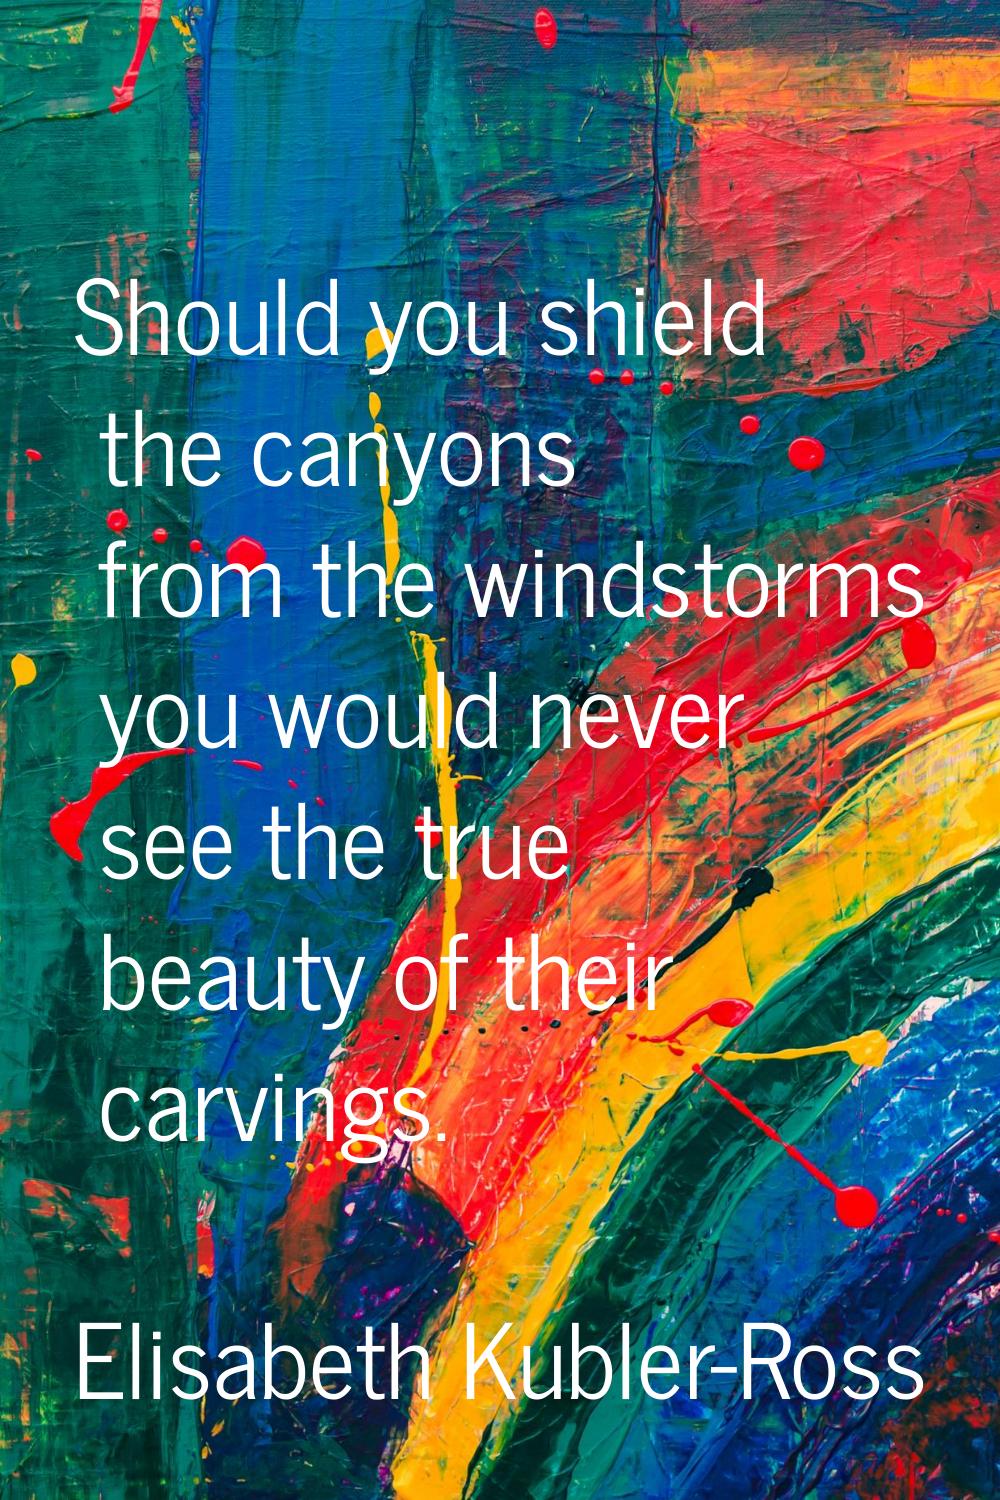 Should you shield the canyons from the windstorms you would never see the true beauty of their carv